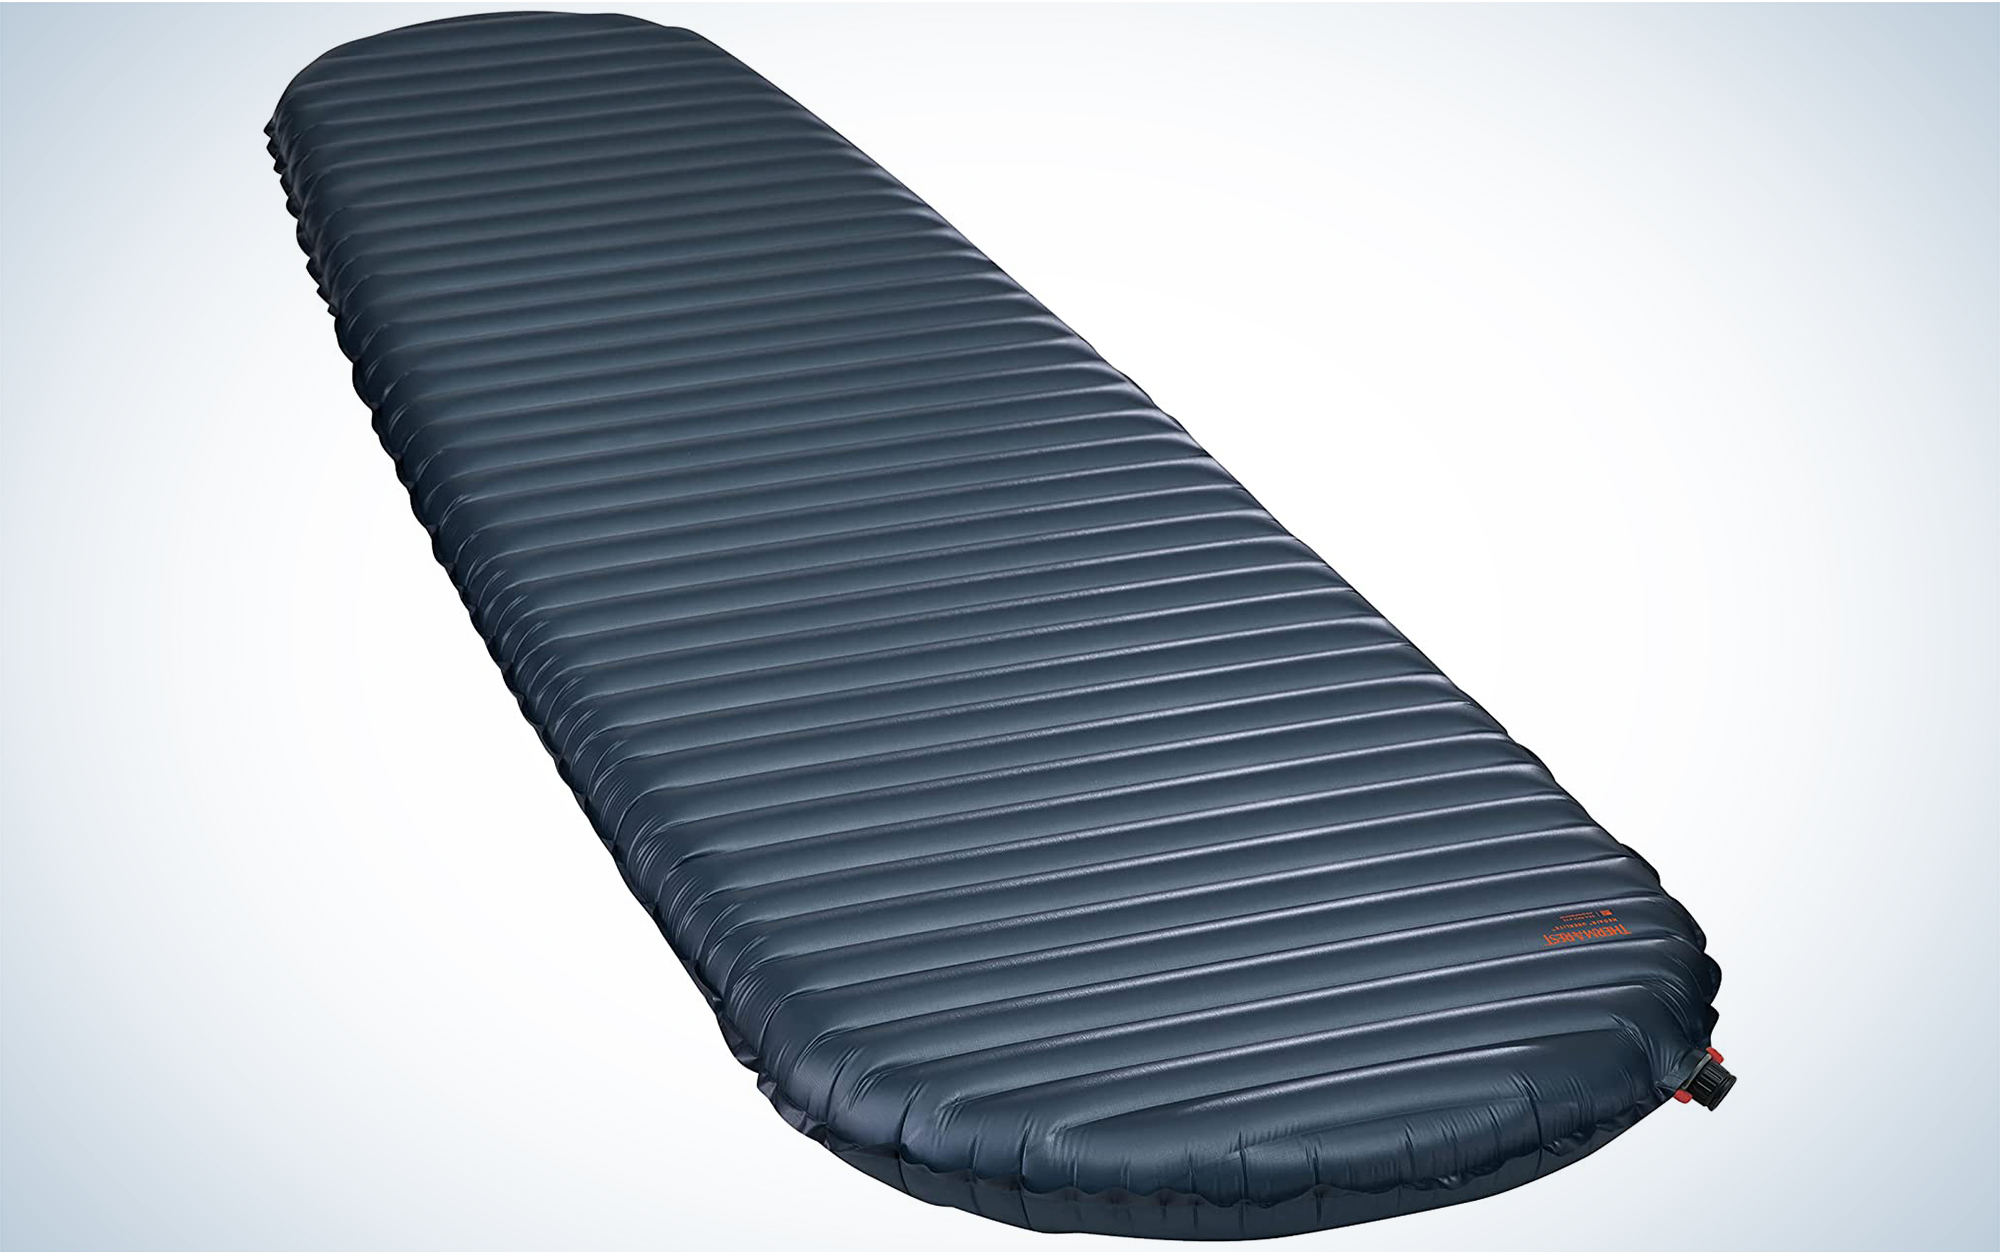 The Therm-a-Rest NeoAir UberLite is the best ultralight sleeping pad.